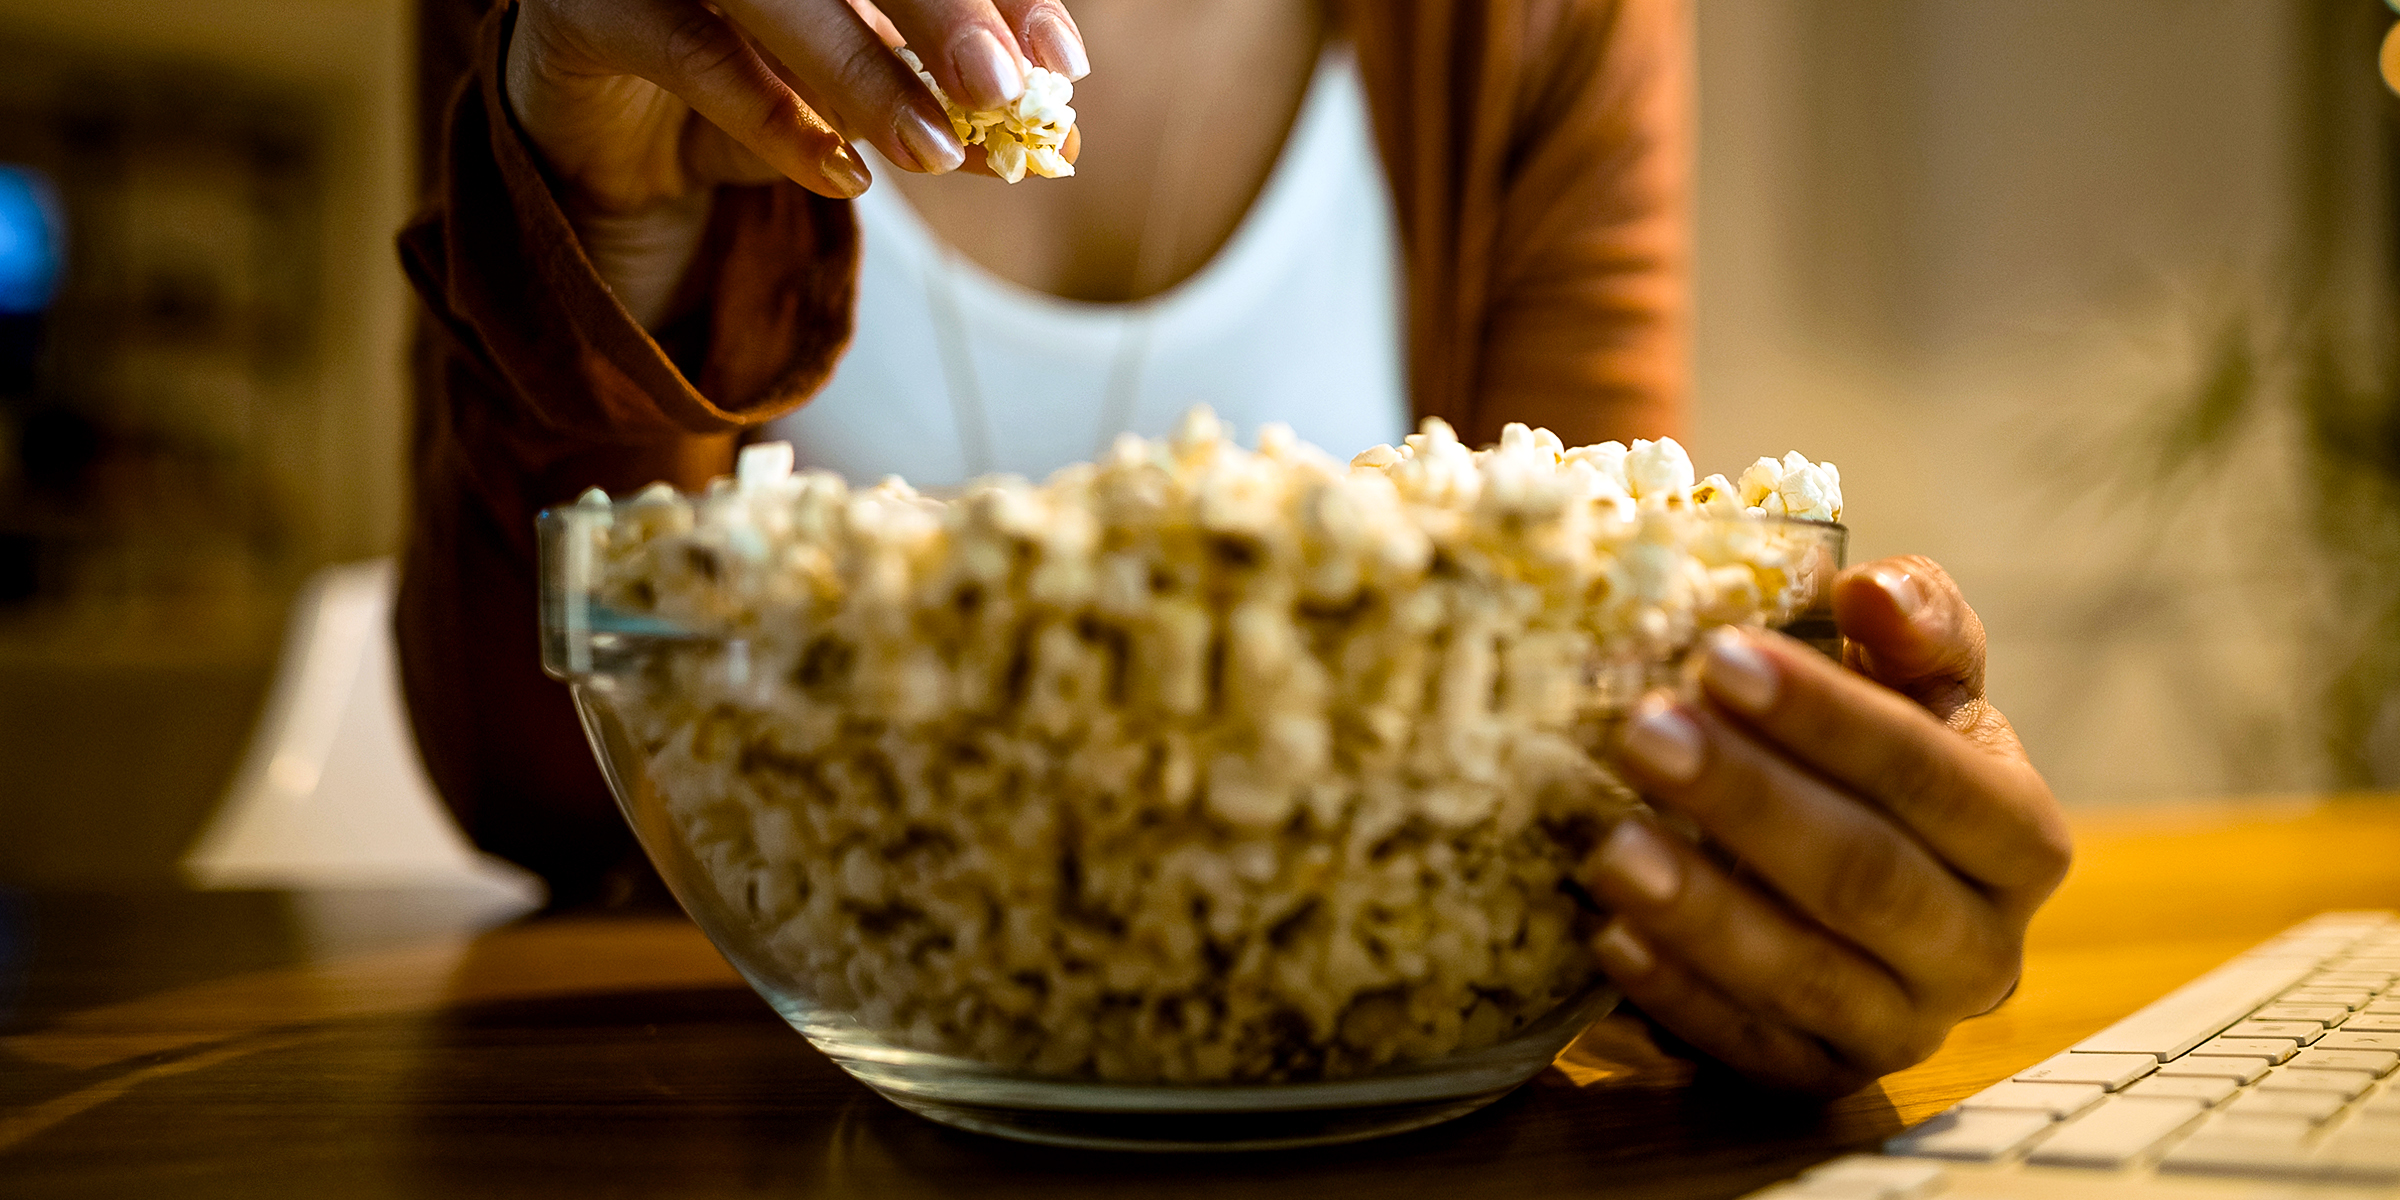 A woman eating a bowl of popcorn | Shutterstock